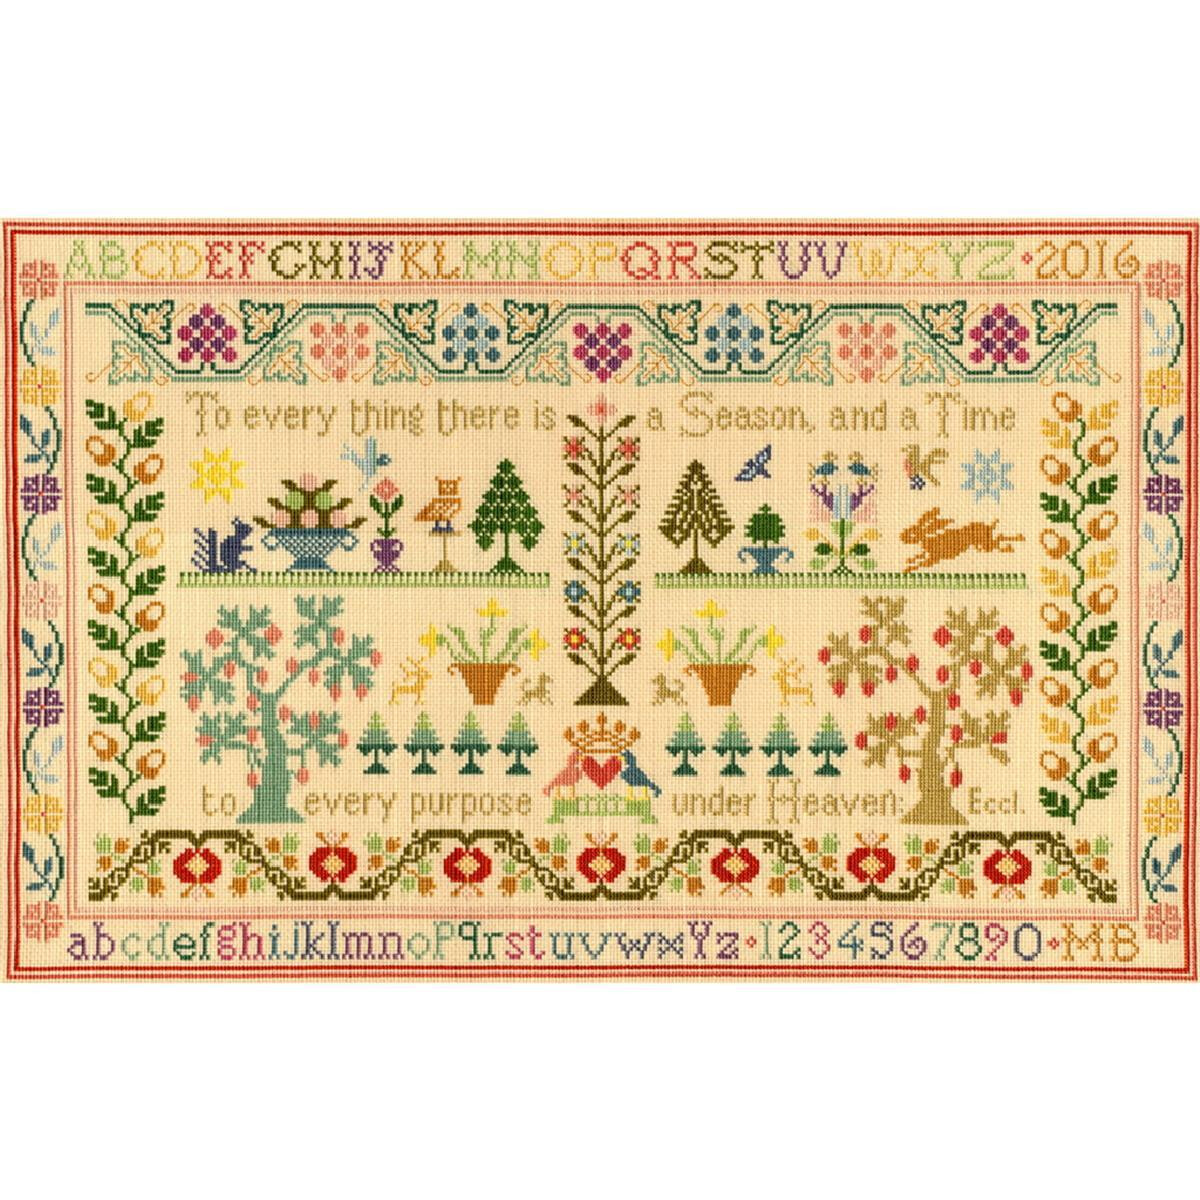 Bothy Threads counted cross stitch Kit "Season and...